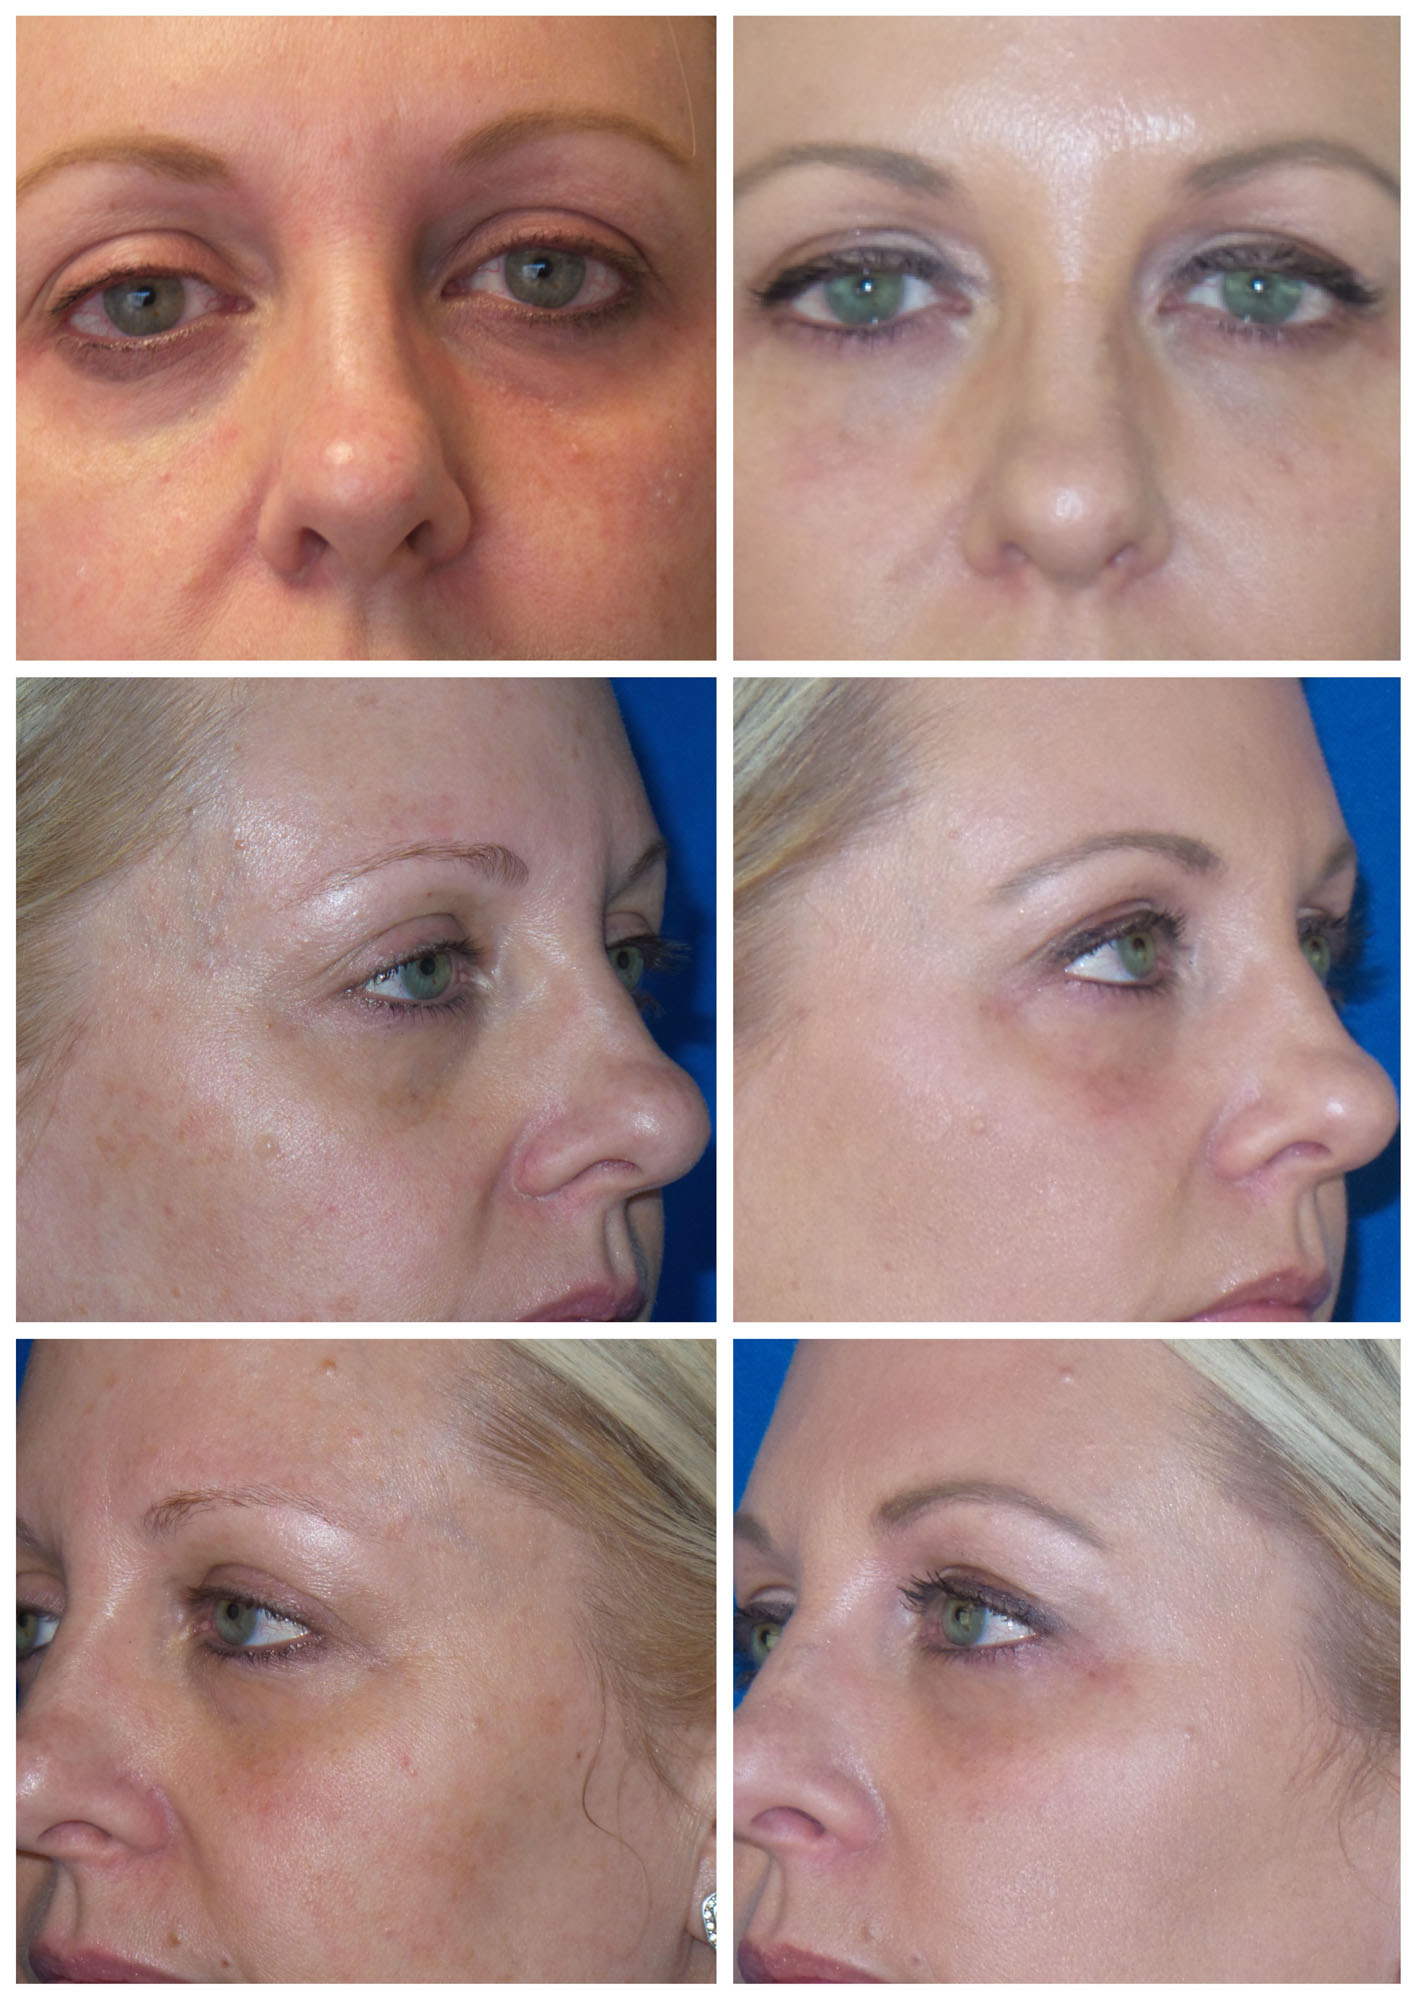 Under-Eye Filler Before and After image from Refresh Aesthetic Center in Whitefish Bay WI